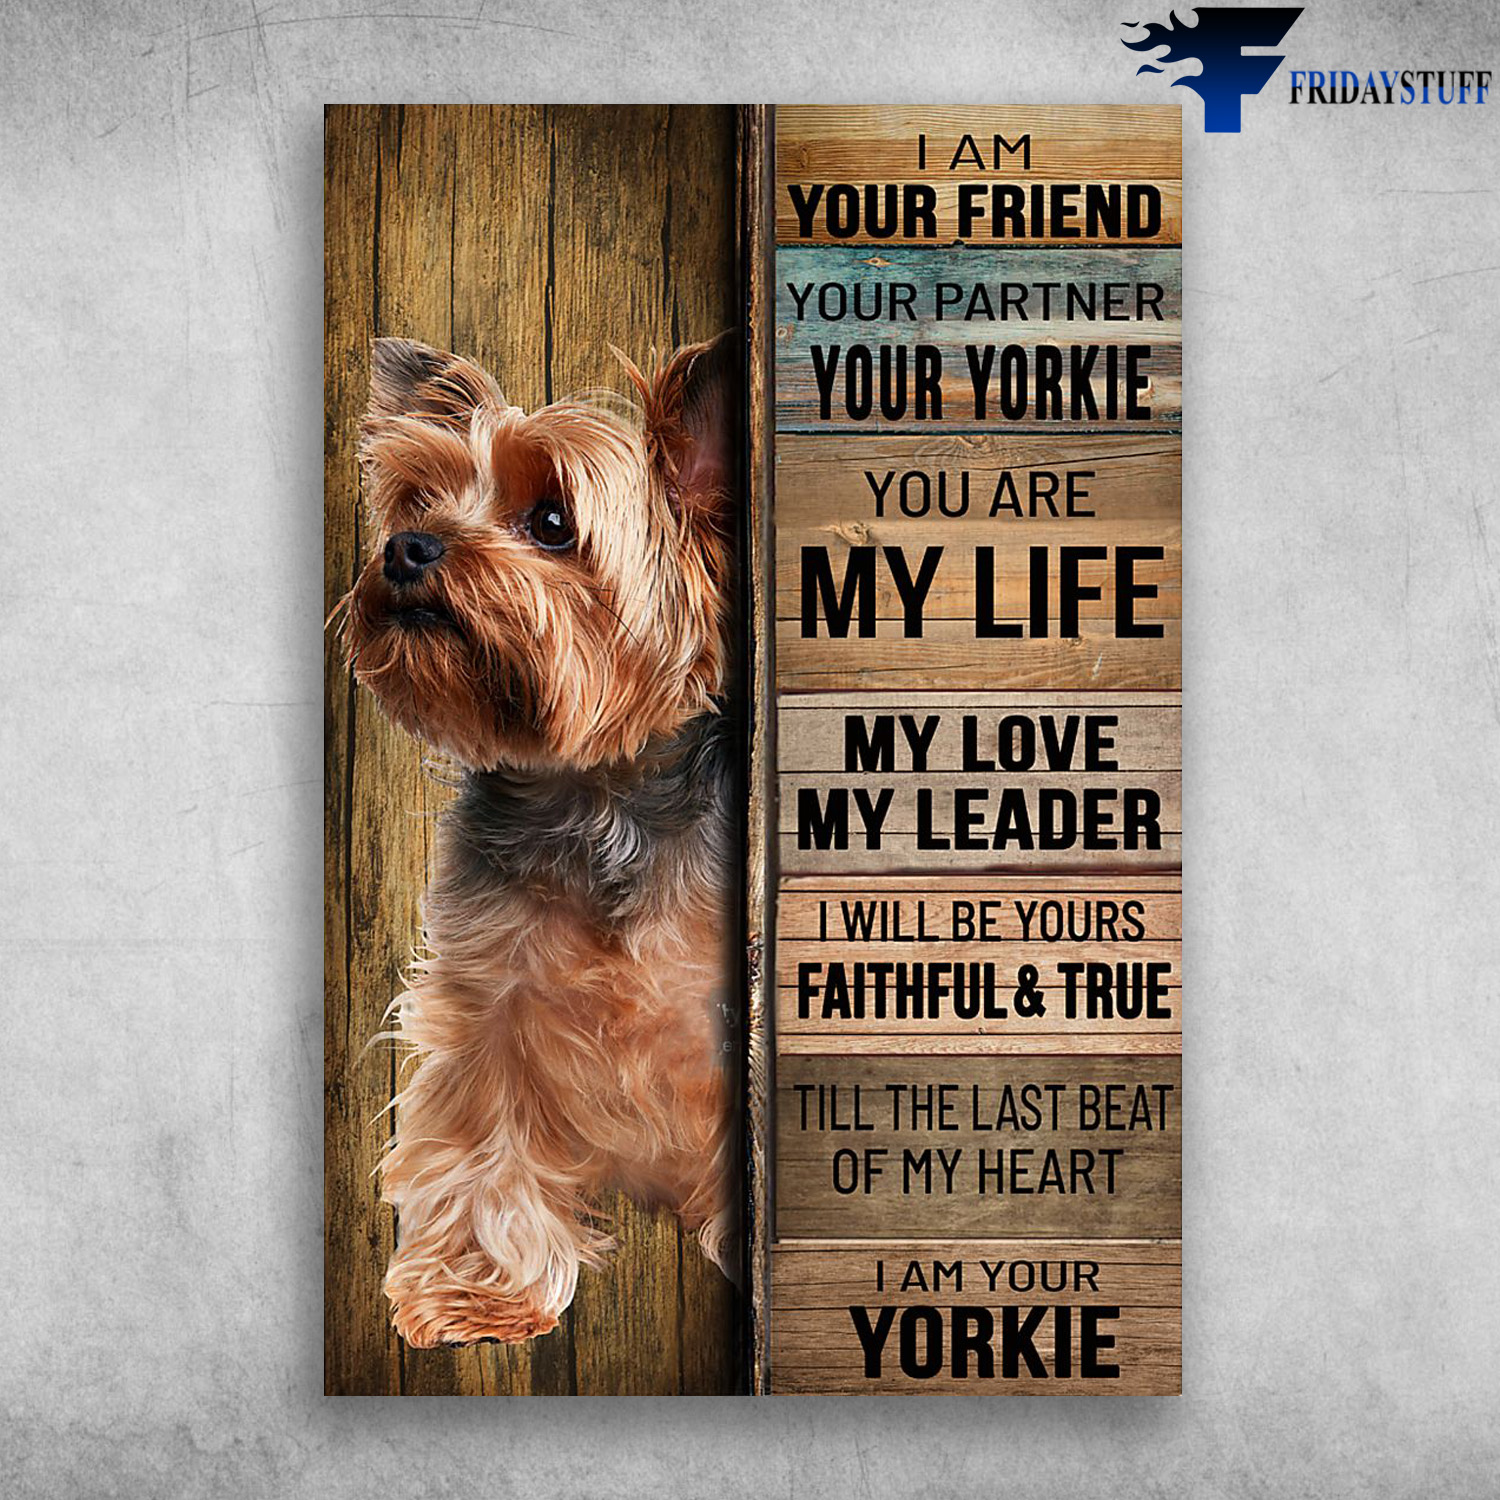 Yorkie Dog - I Am Your Friend, Your Partner, Your Yorkie, You Are My Life, My Love, My Leader, I Will Be Yours Failthful And True, Till The Last Beat Of My Heart, I Am Your Yorkie